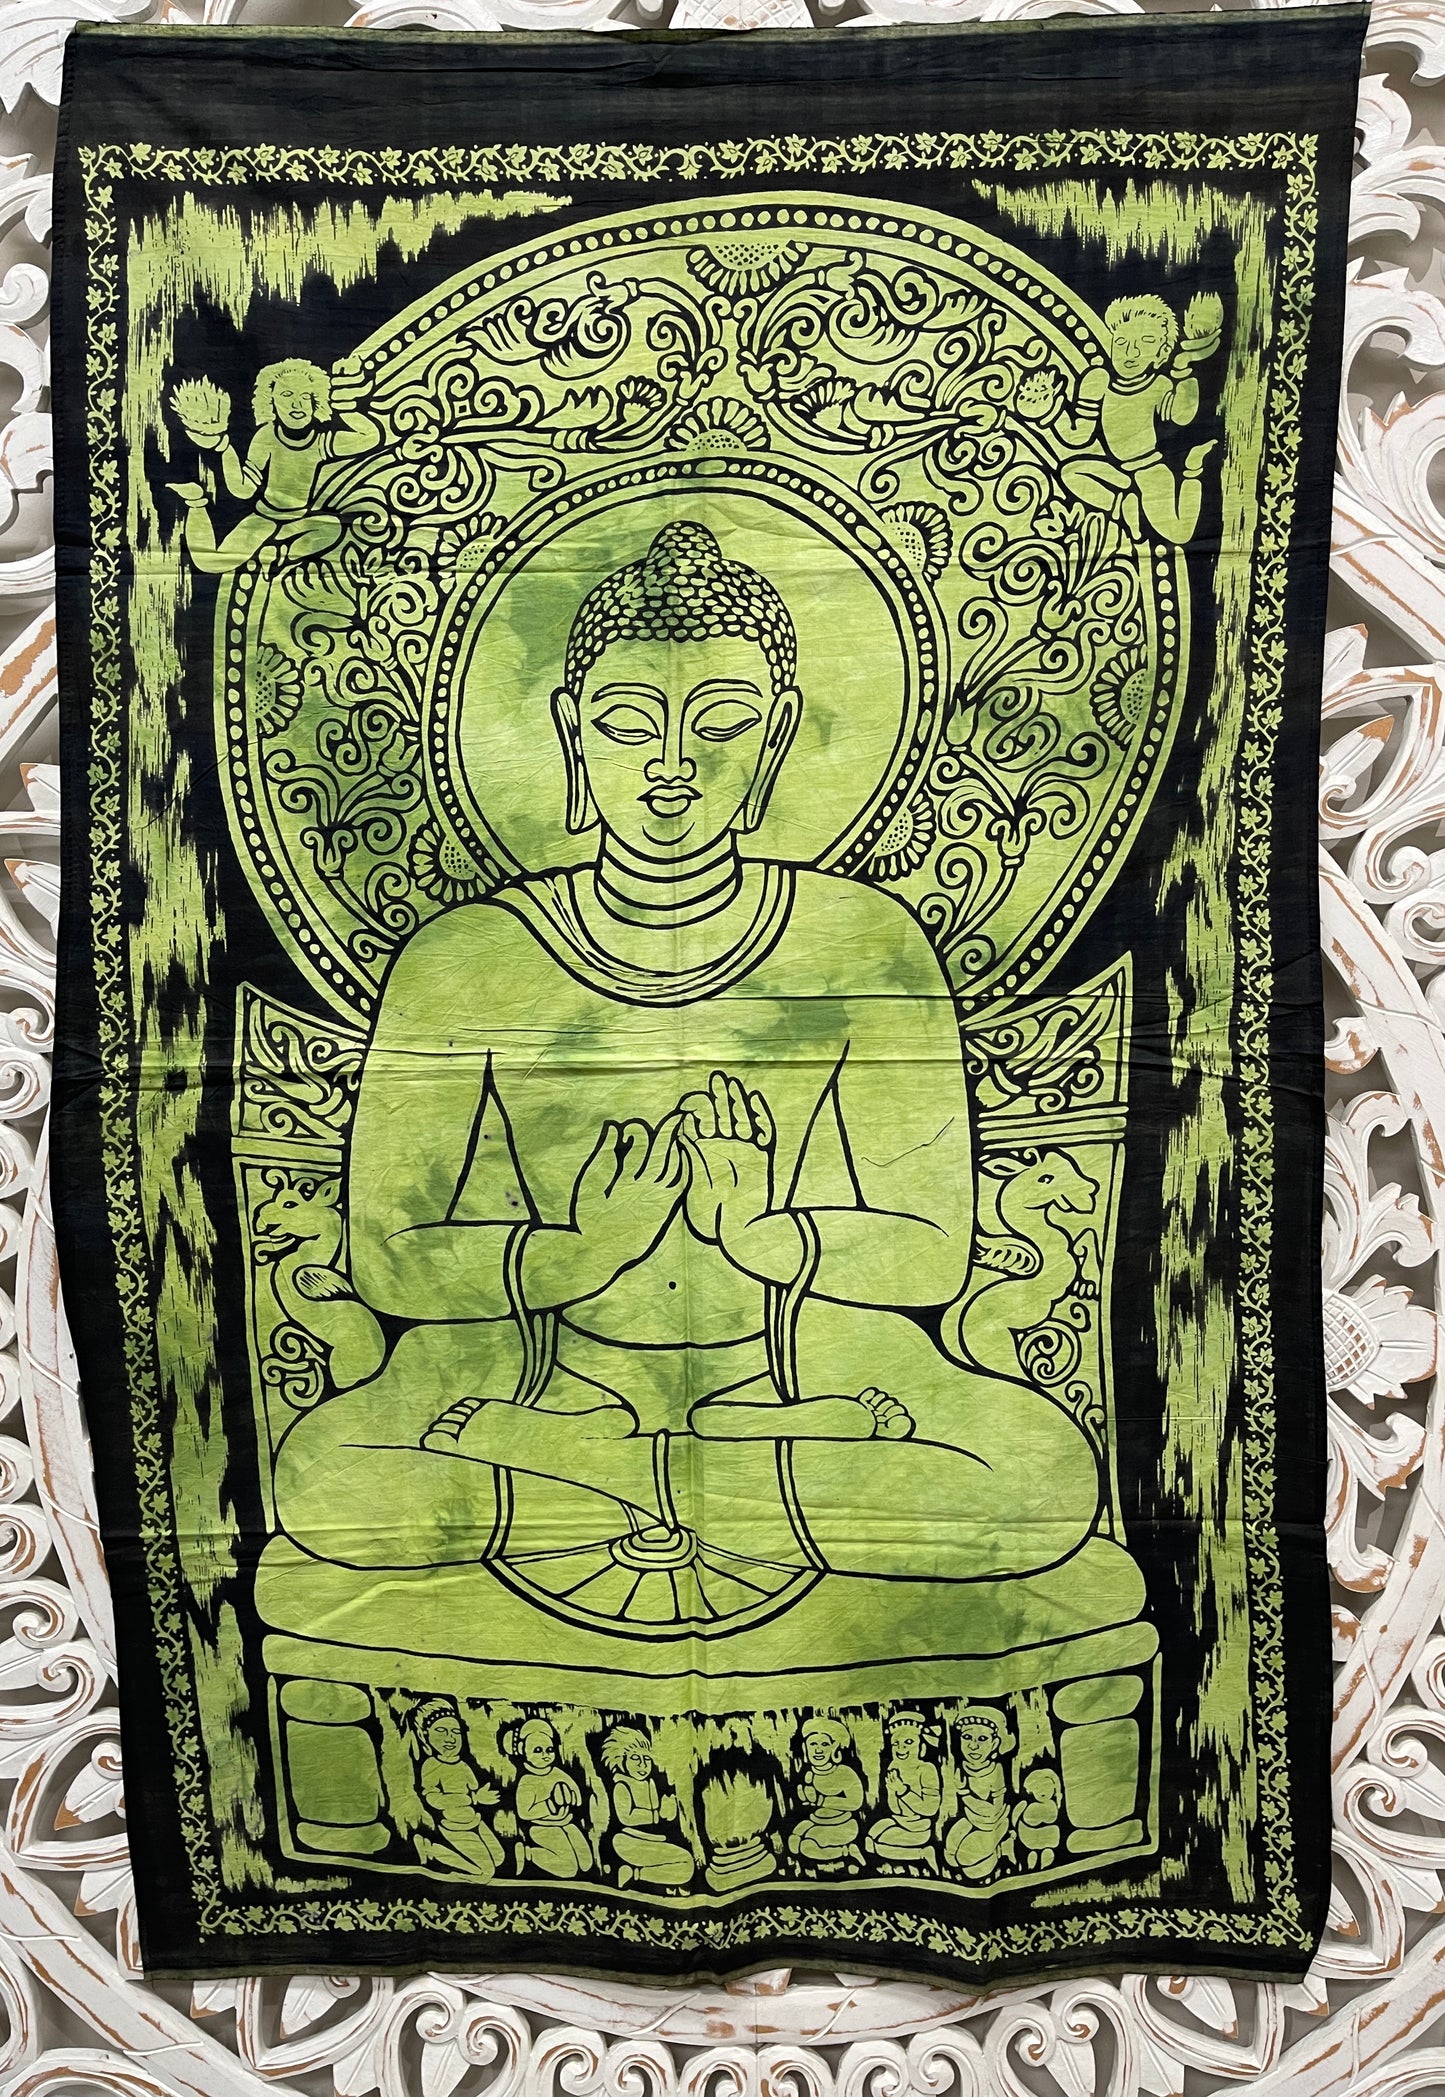 Hand printed Fabric Posters Mini Buddha Tapestry Wall Hanging - Available in 5 Colors